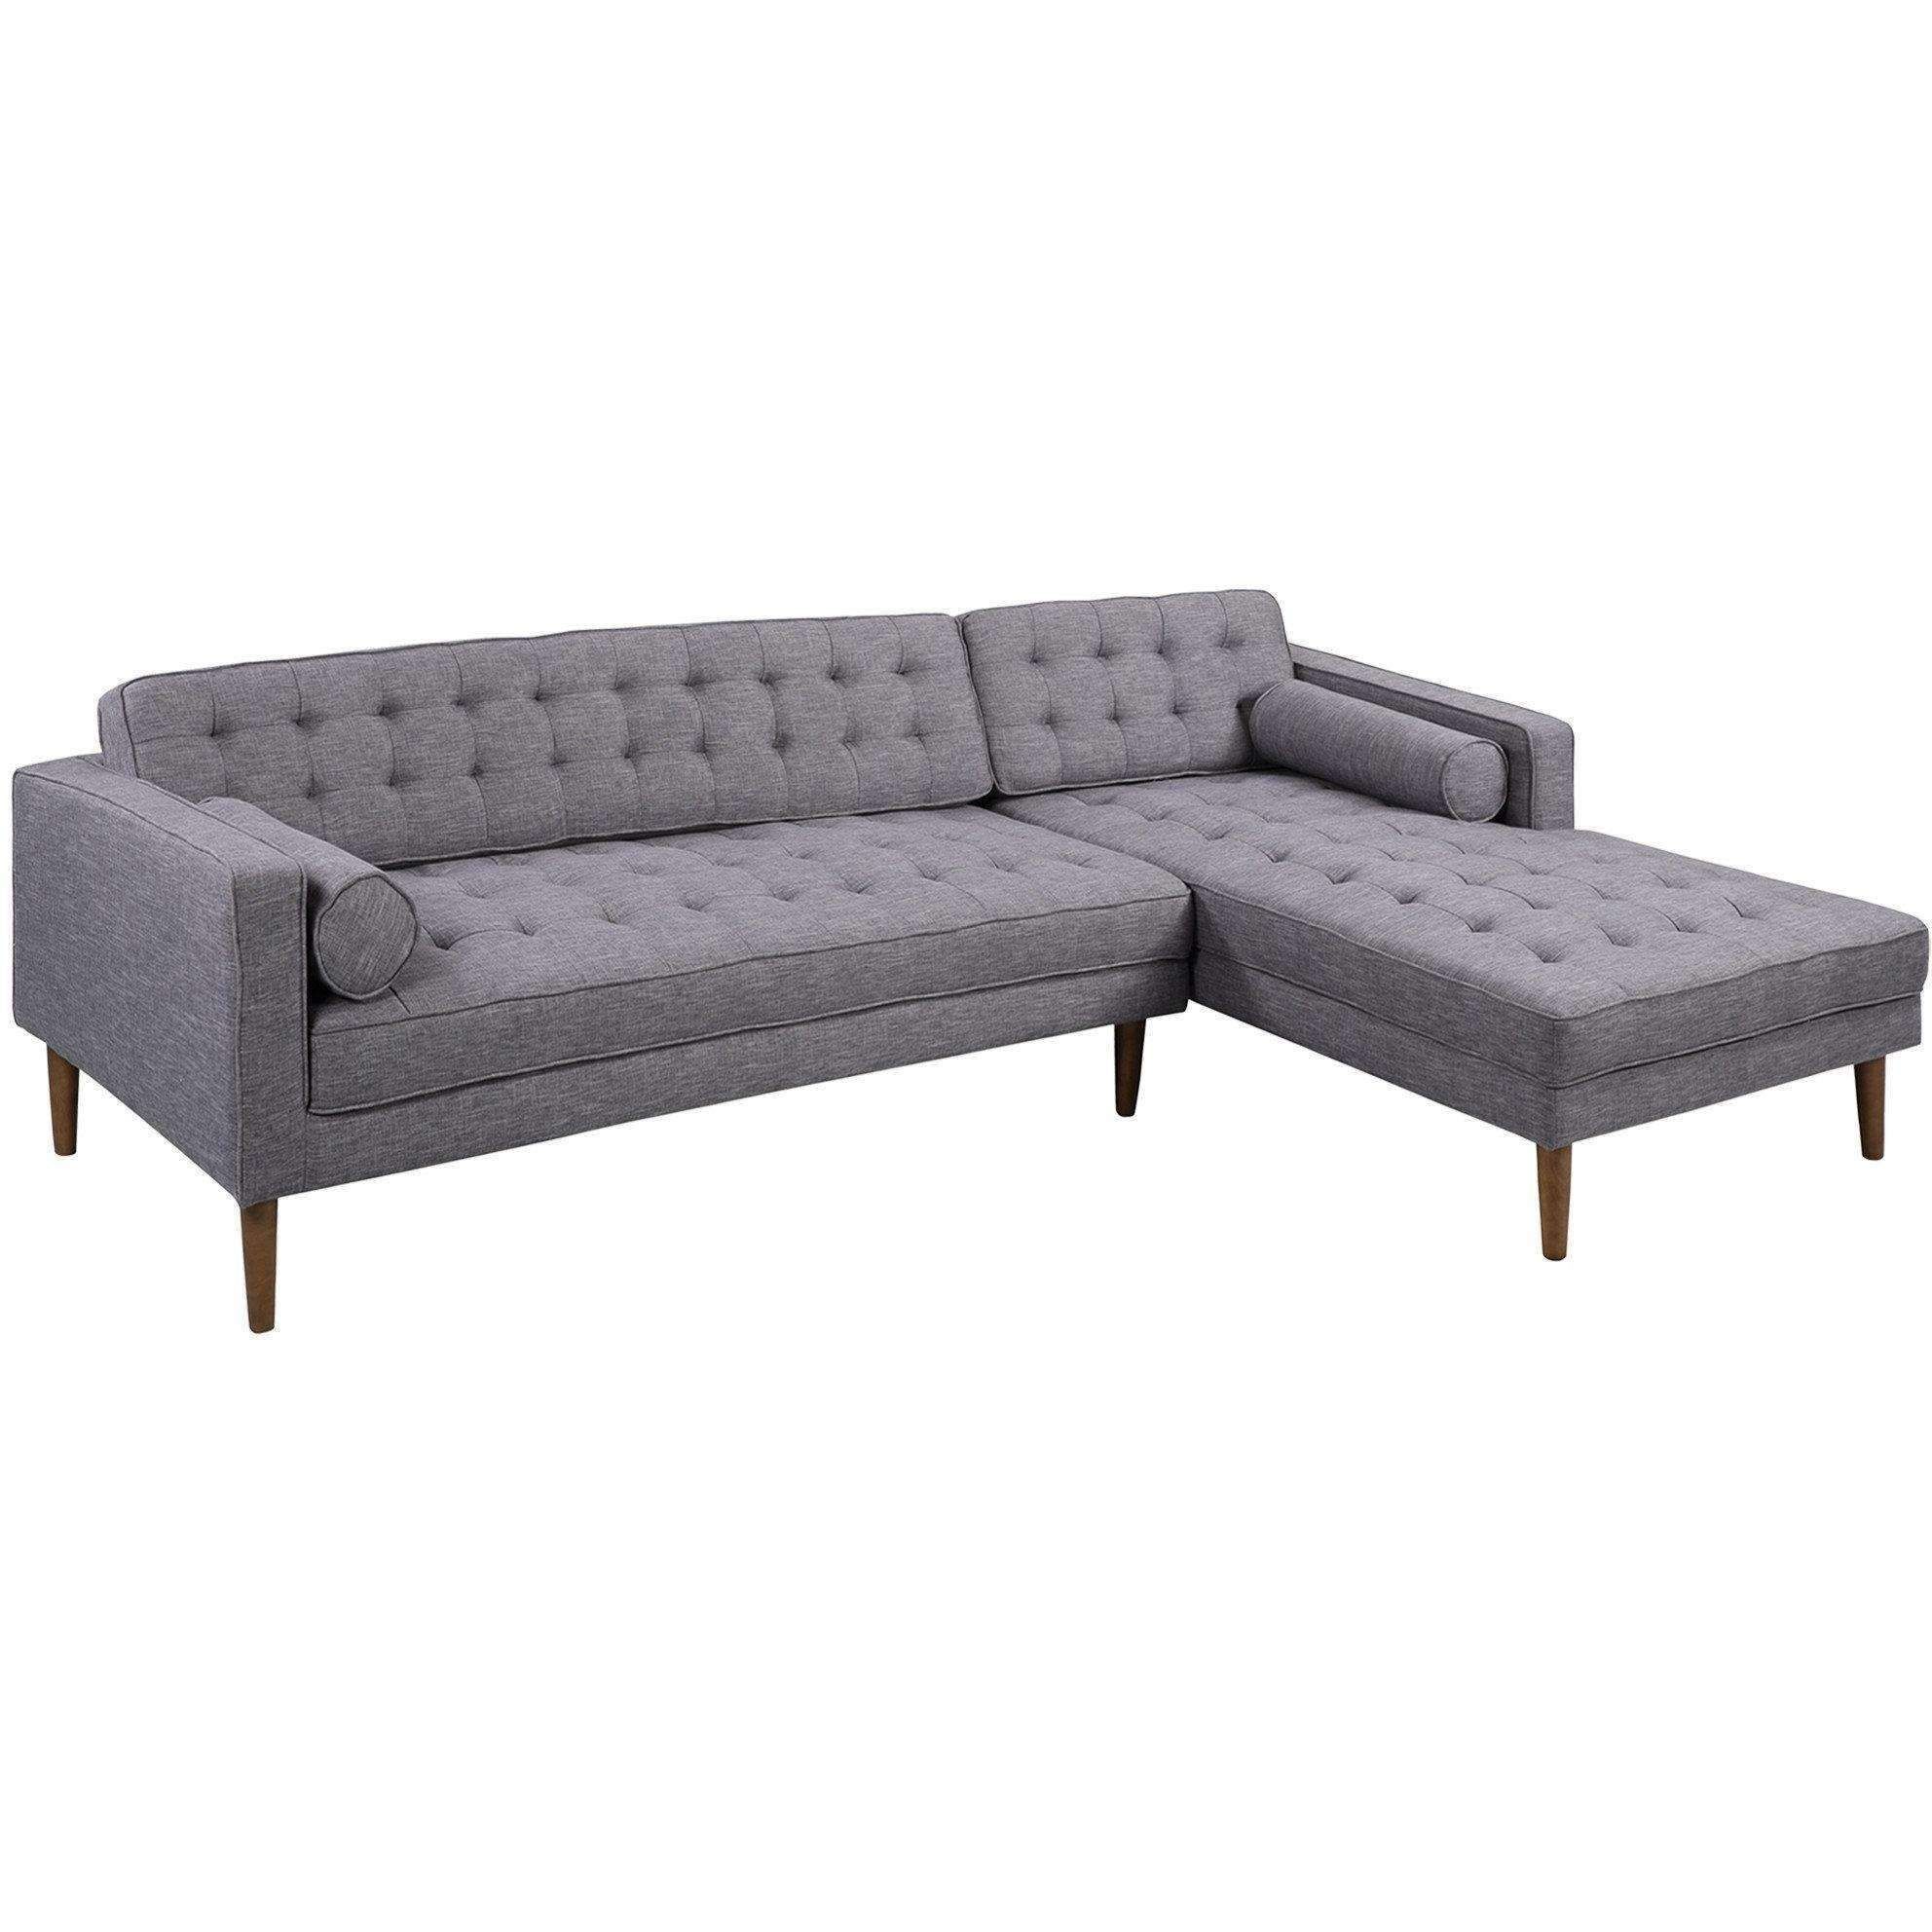 Armen Living Element Right Side Chaise Sectional In Dark For Element Left Side Chaise Sectional Sofas In Dark Gray Linen And Walnut Legs (View 4 of 15)